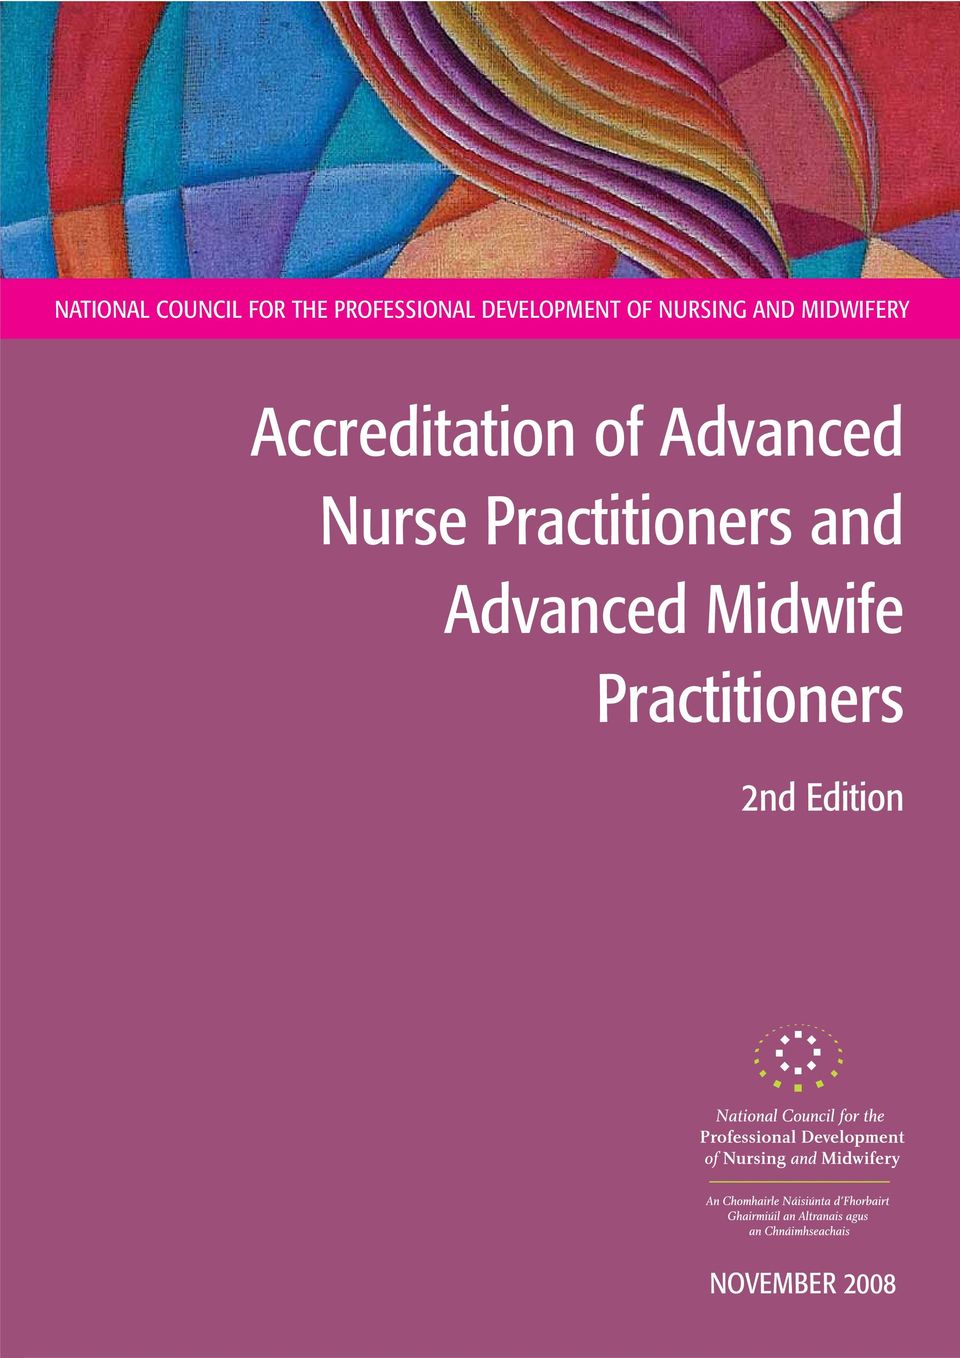 Accreditation of Advanced Nurse Practitioners